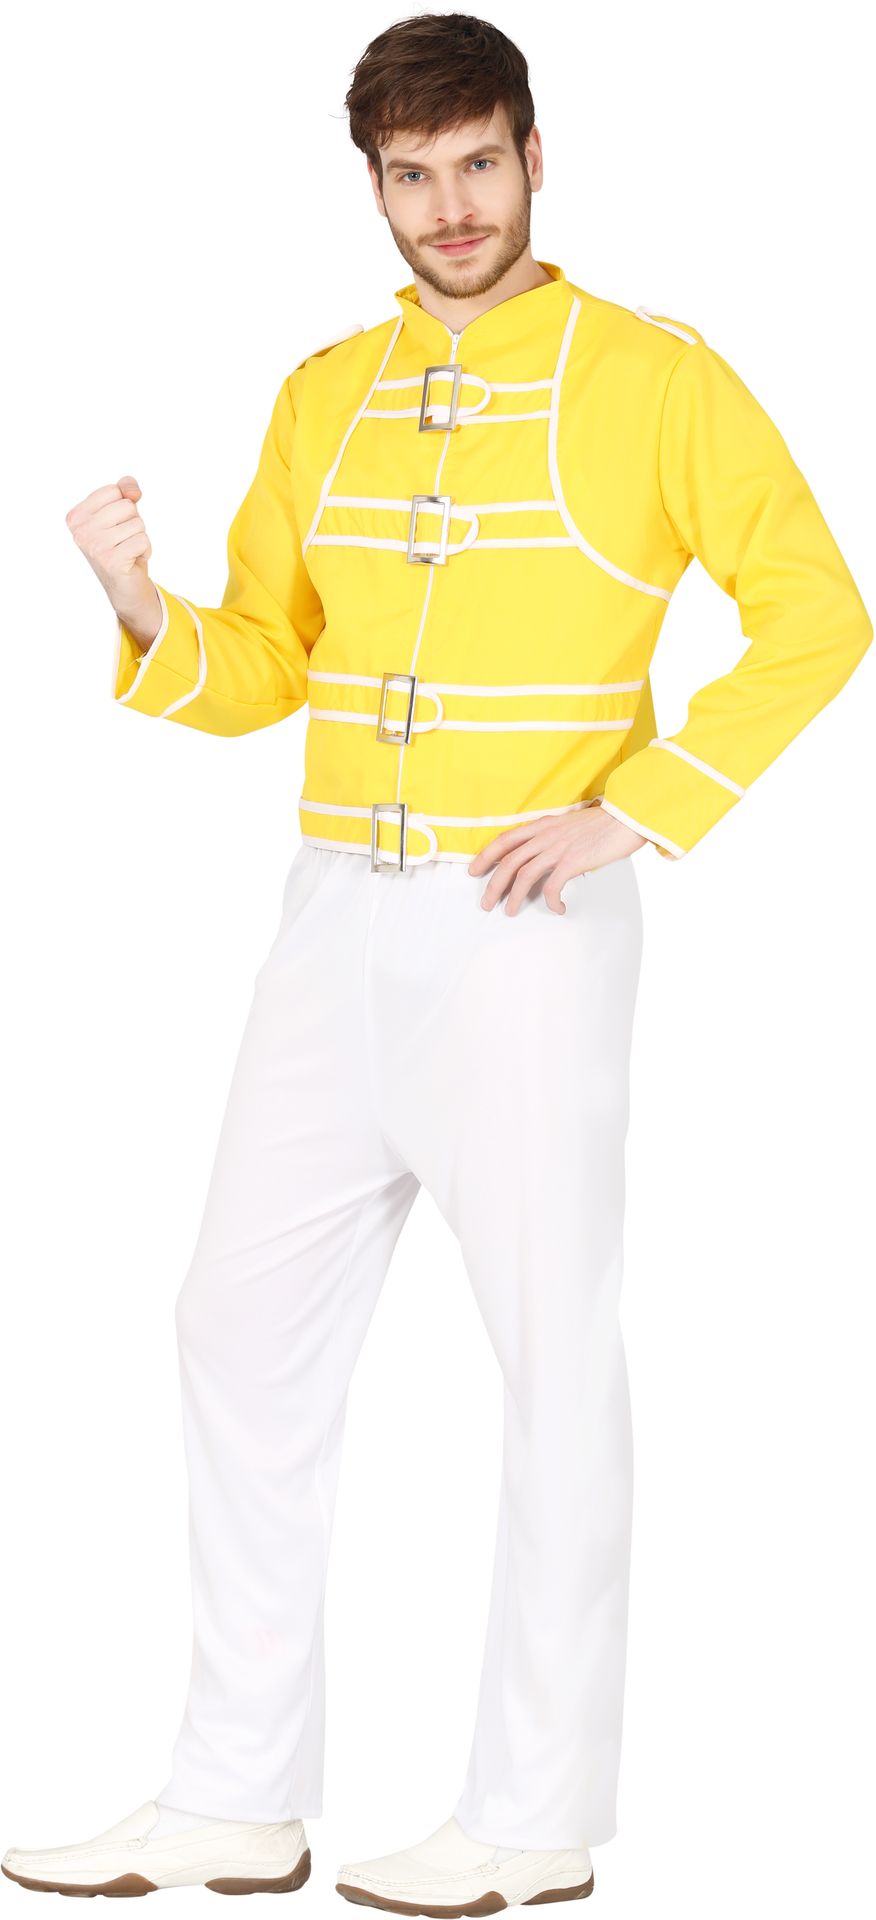 Queen Freddy Mercury outfit